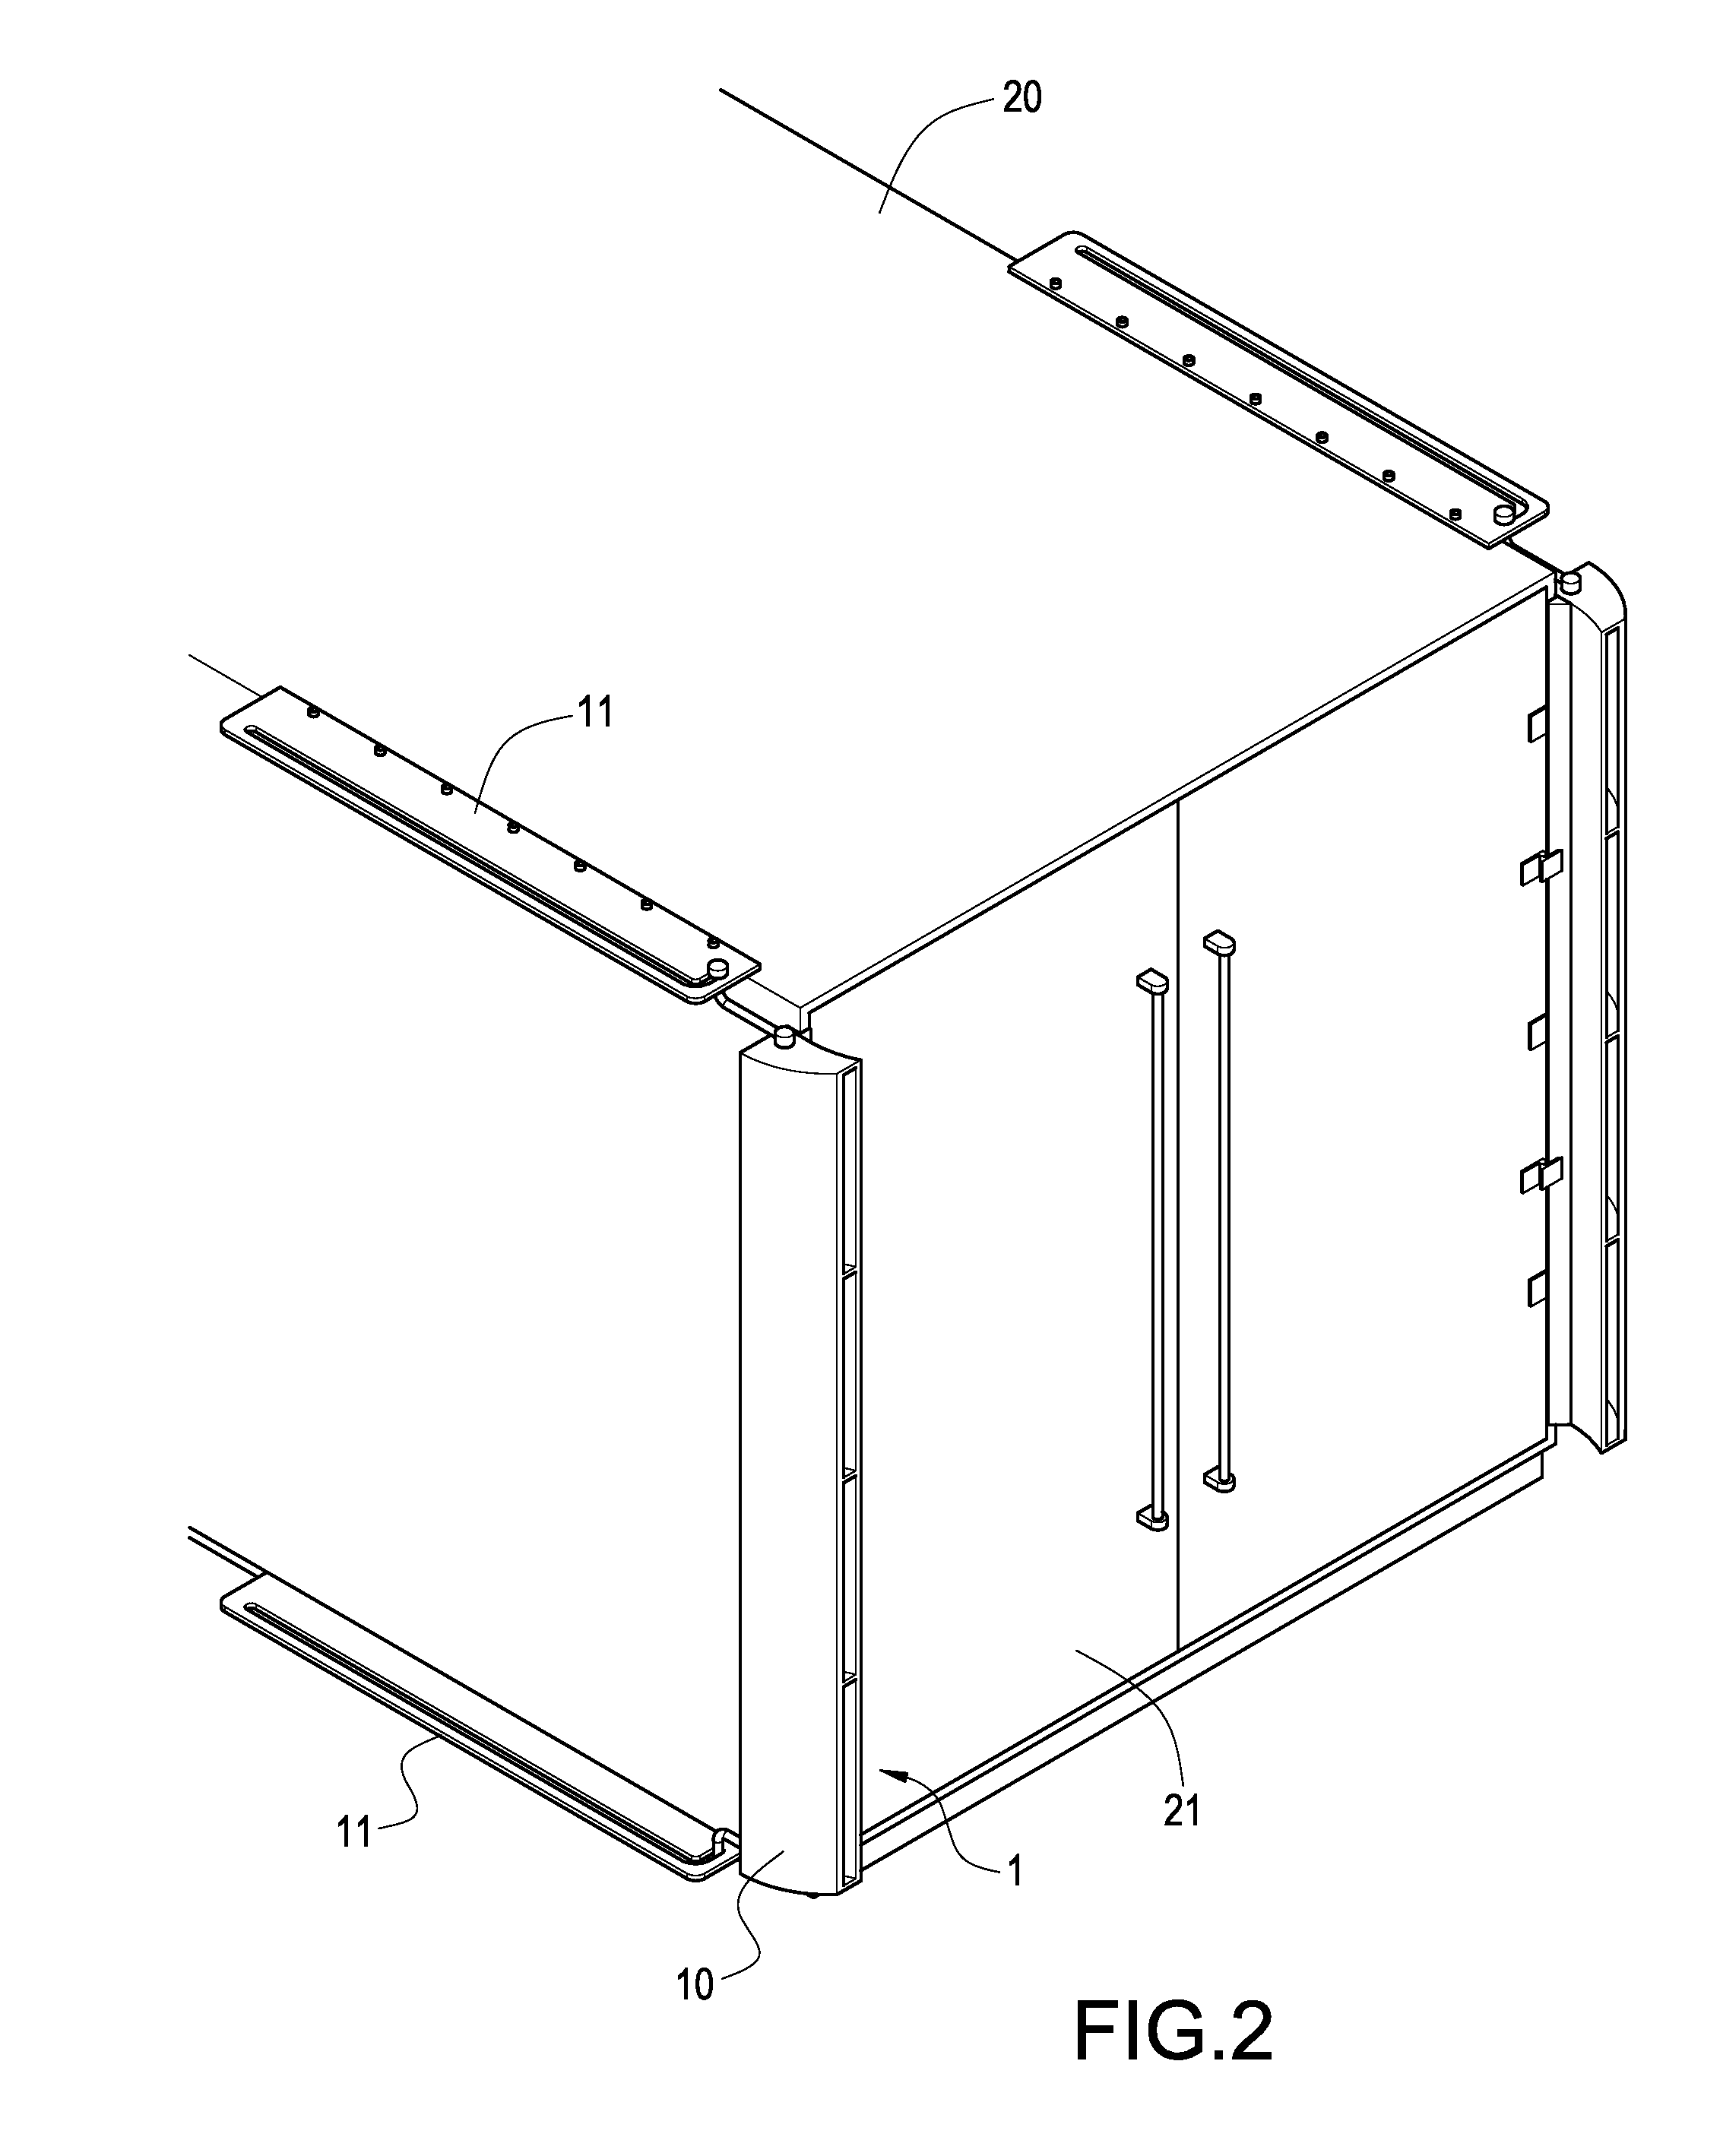 Slippage-typed diversion apparatus for reducing drag of vehicle